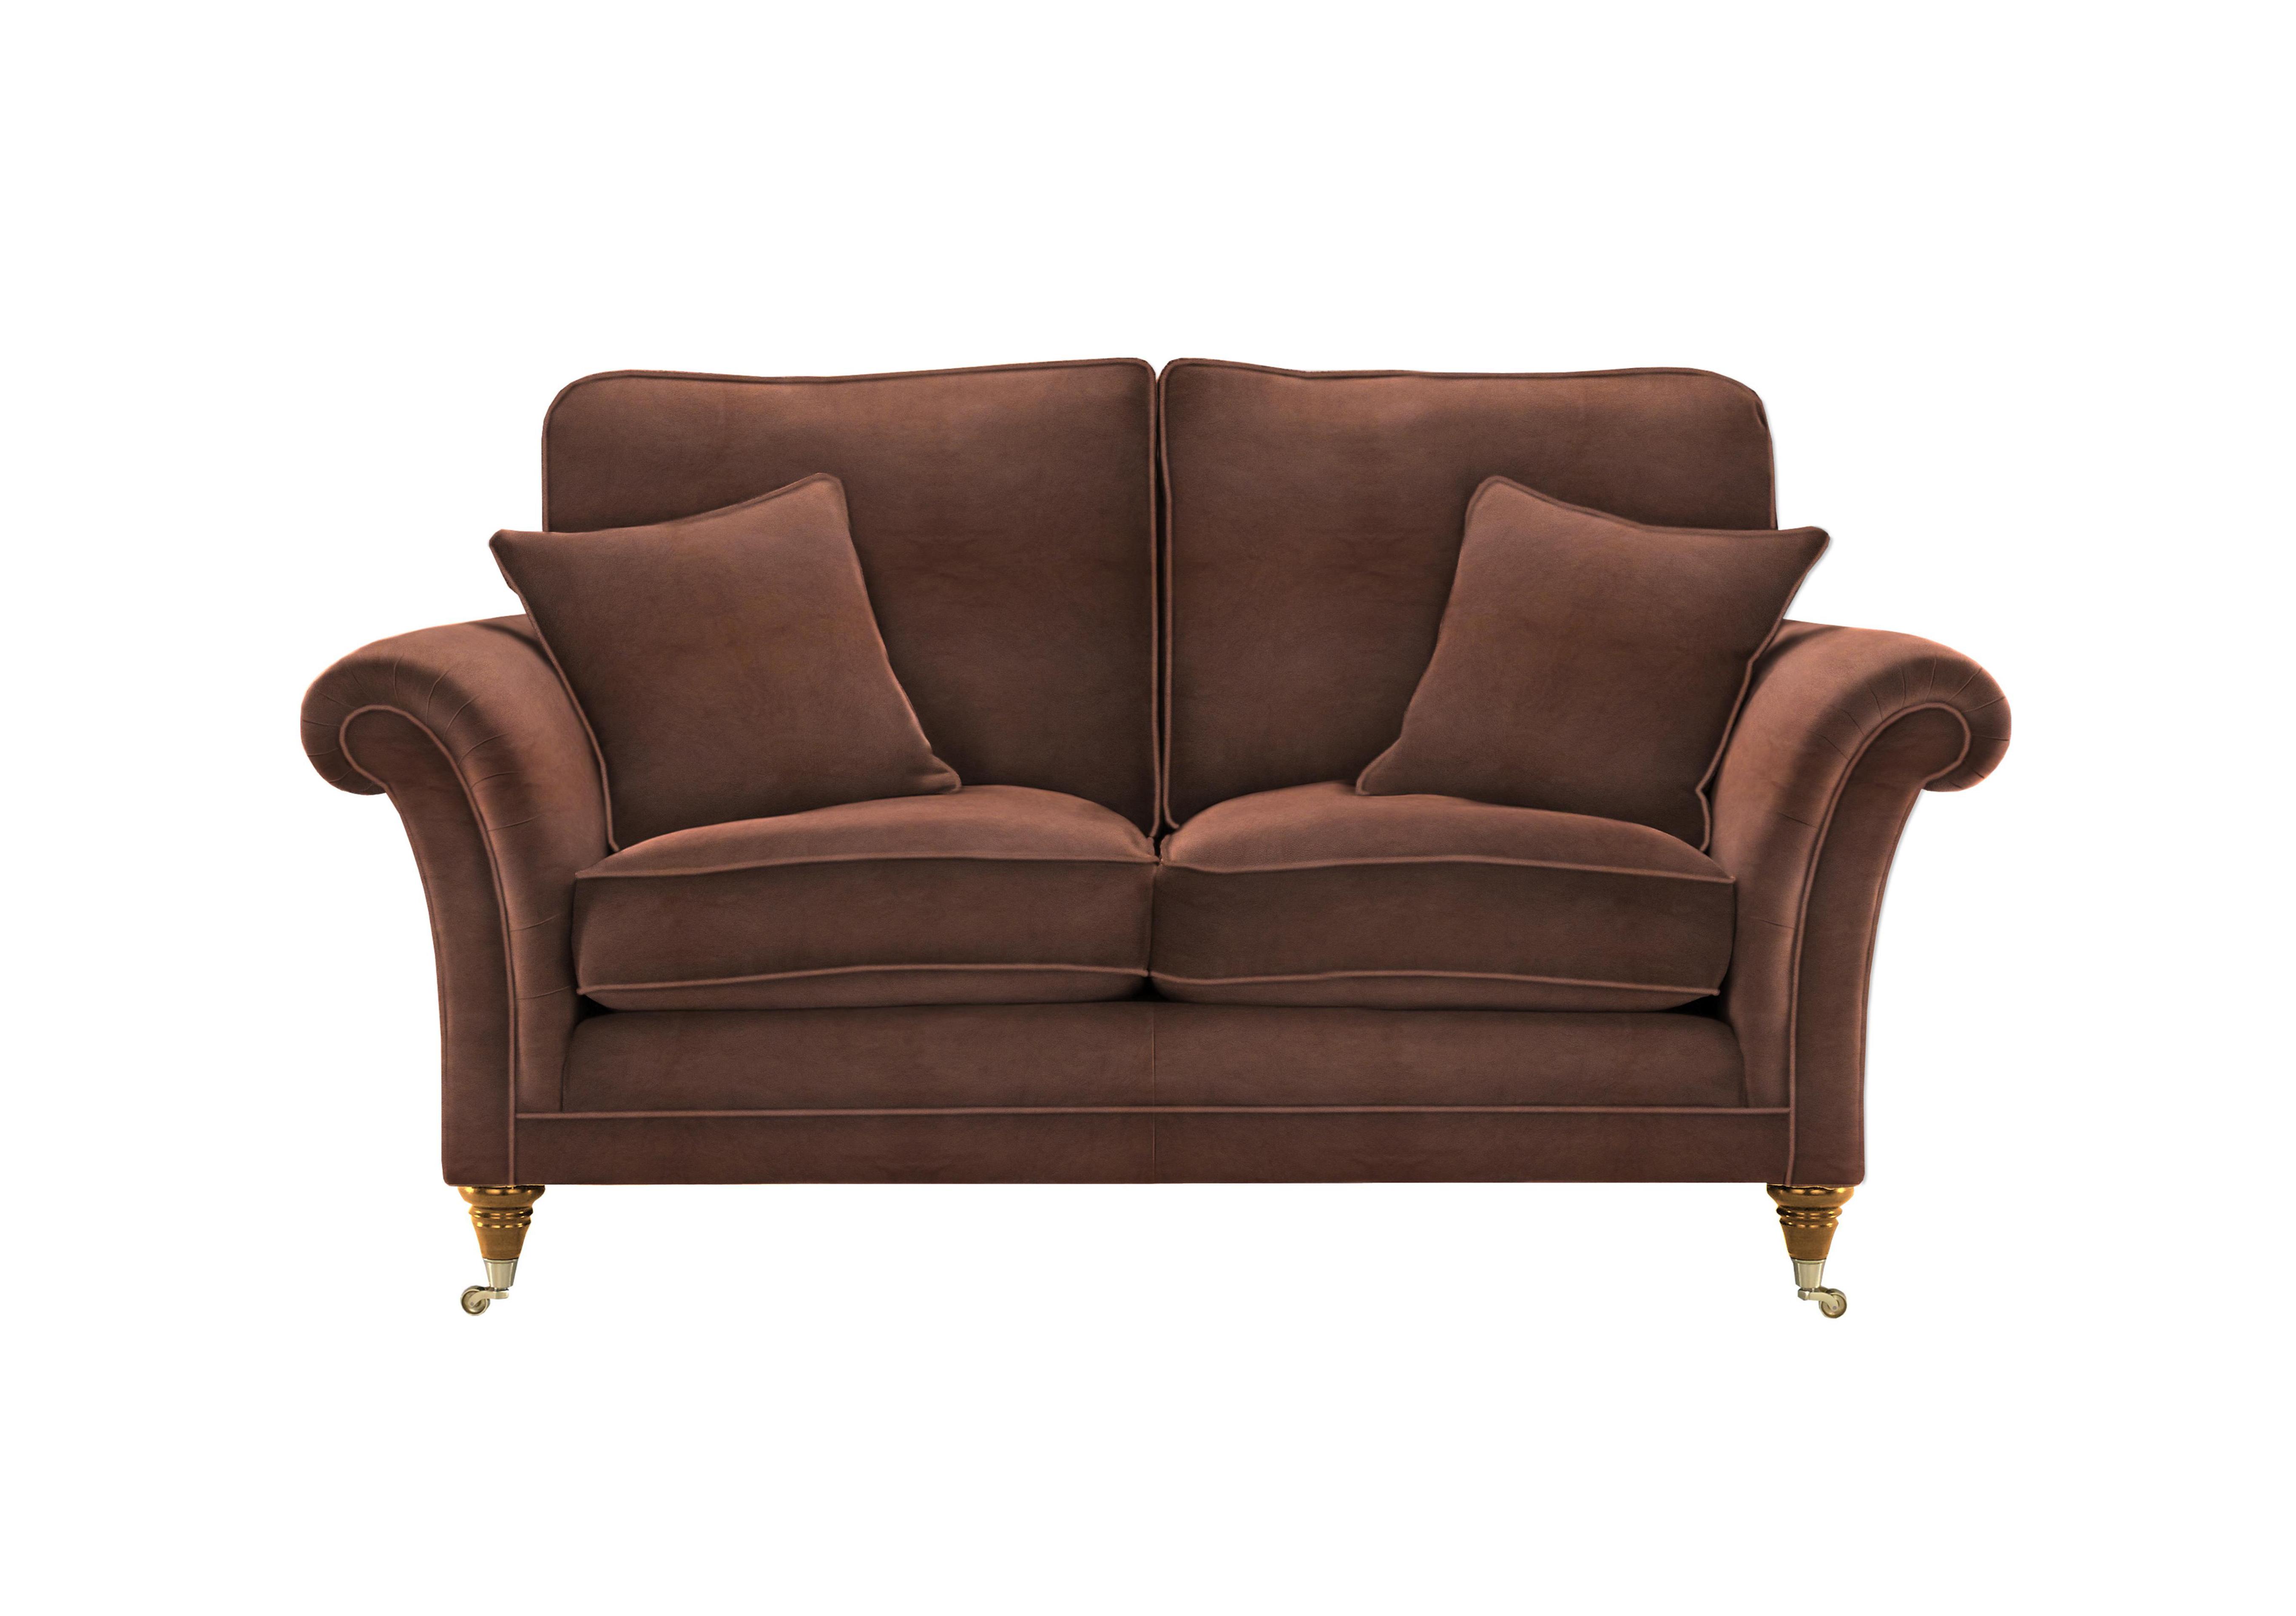 Burghley 2 Seater Leather Sofa in London Saddle 001033-0021 on Furniture Village